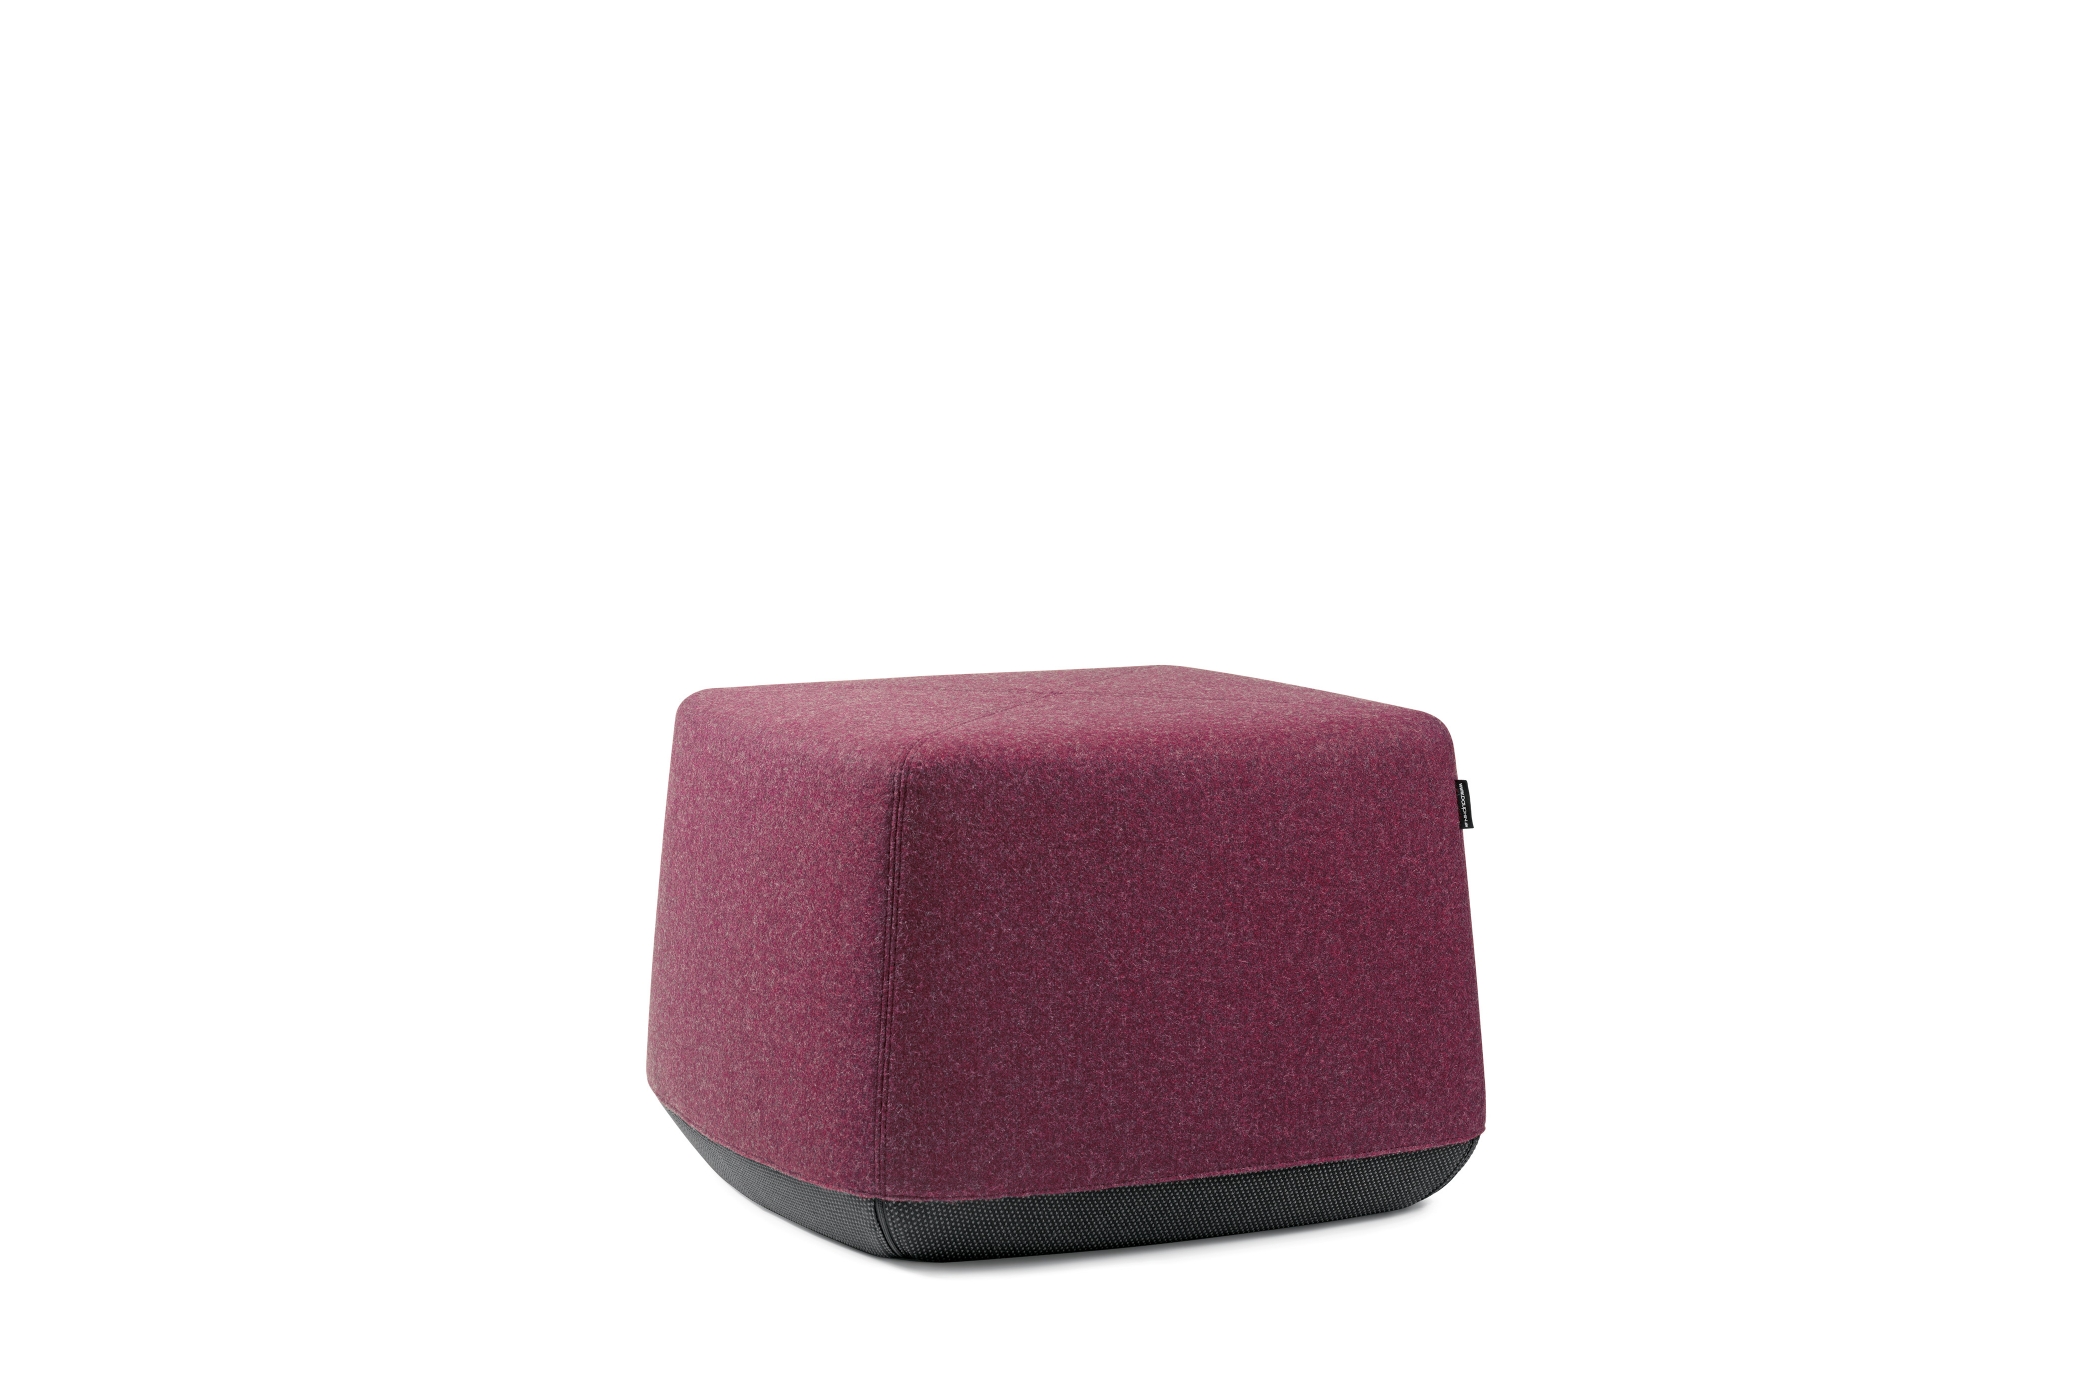 Allora Poufs: light stools for the office